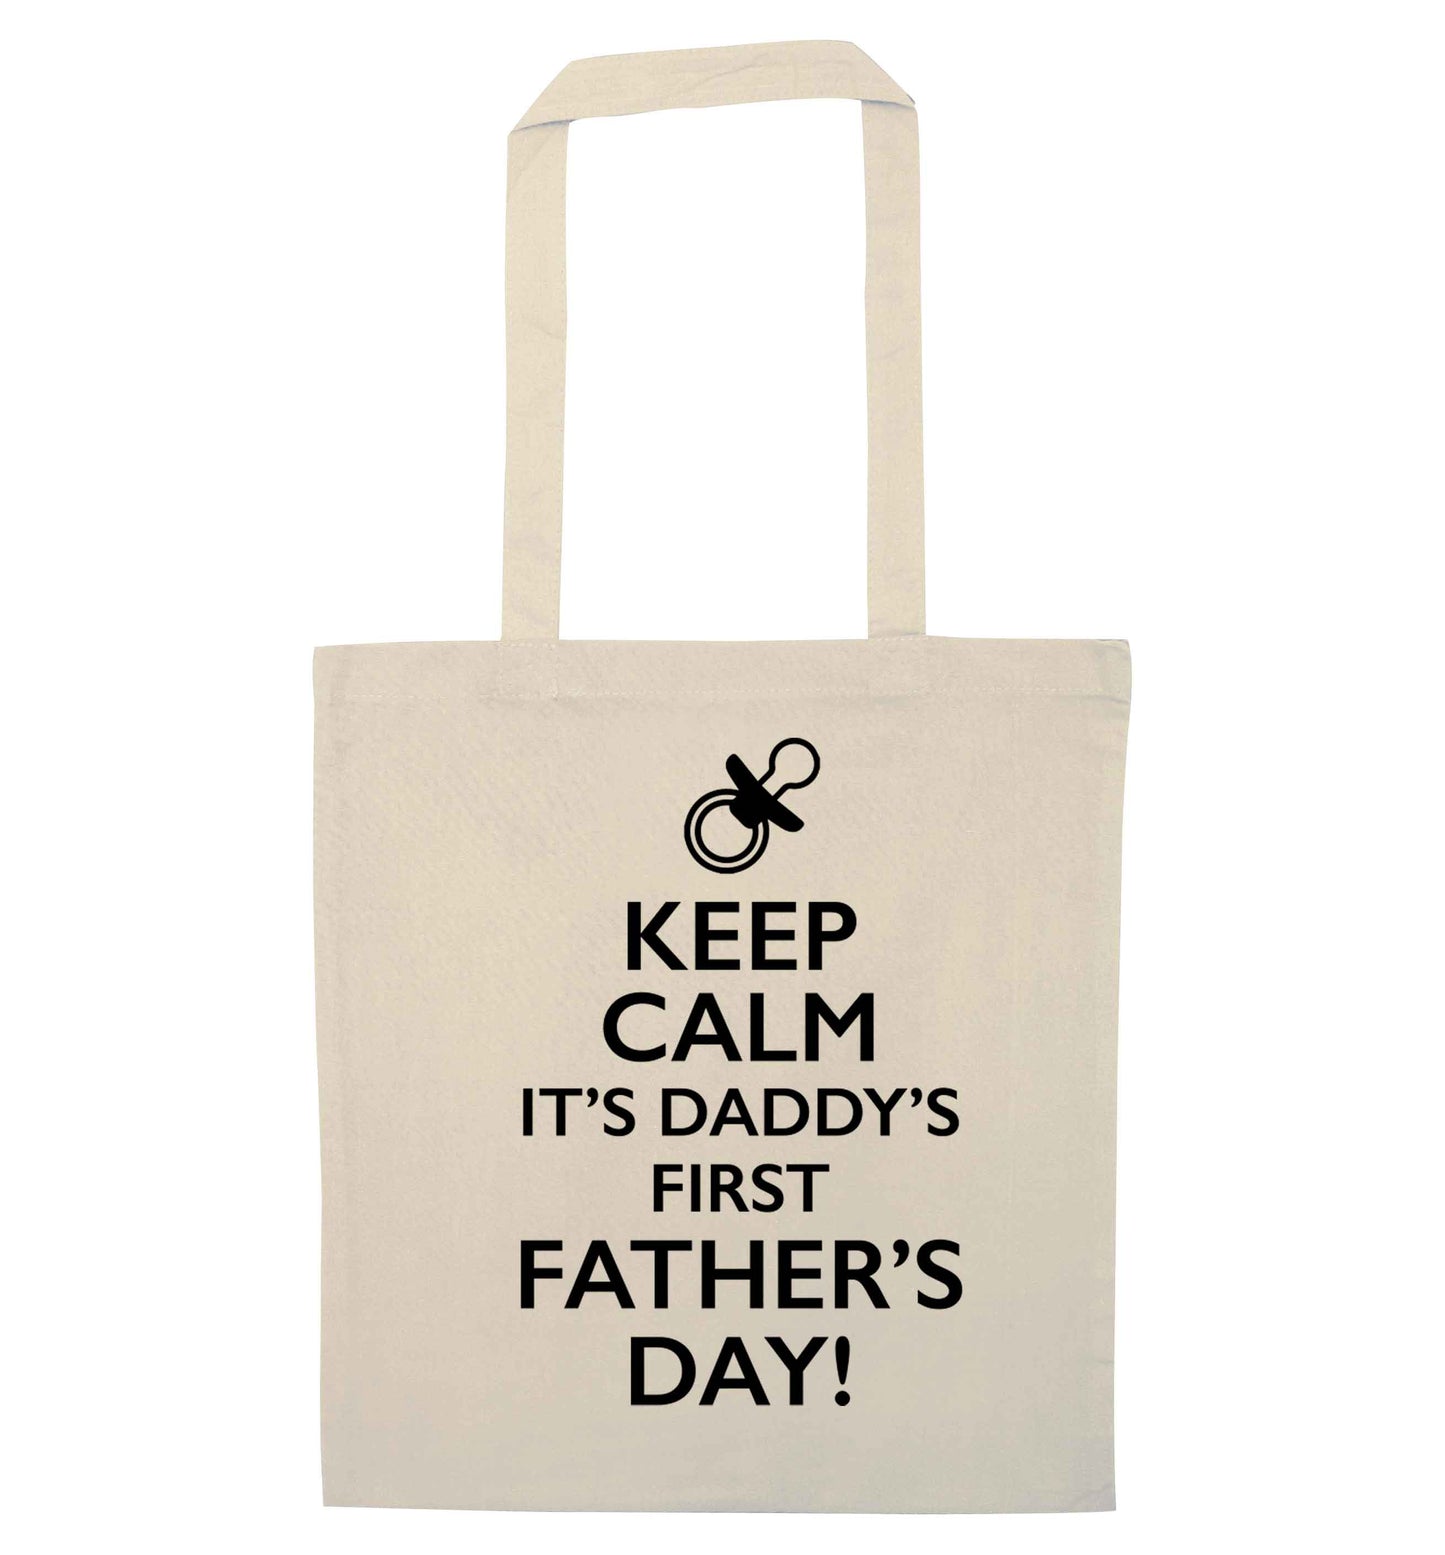 Keep calm it's daddys first father's day natural tote bag